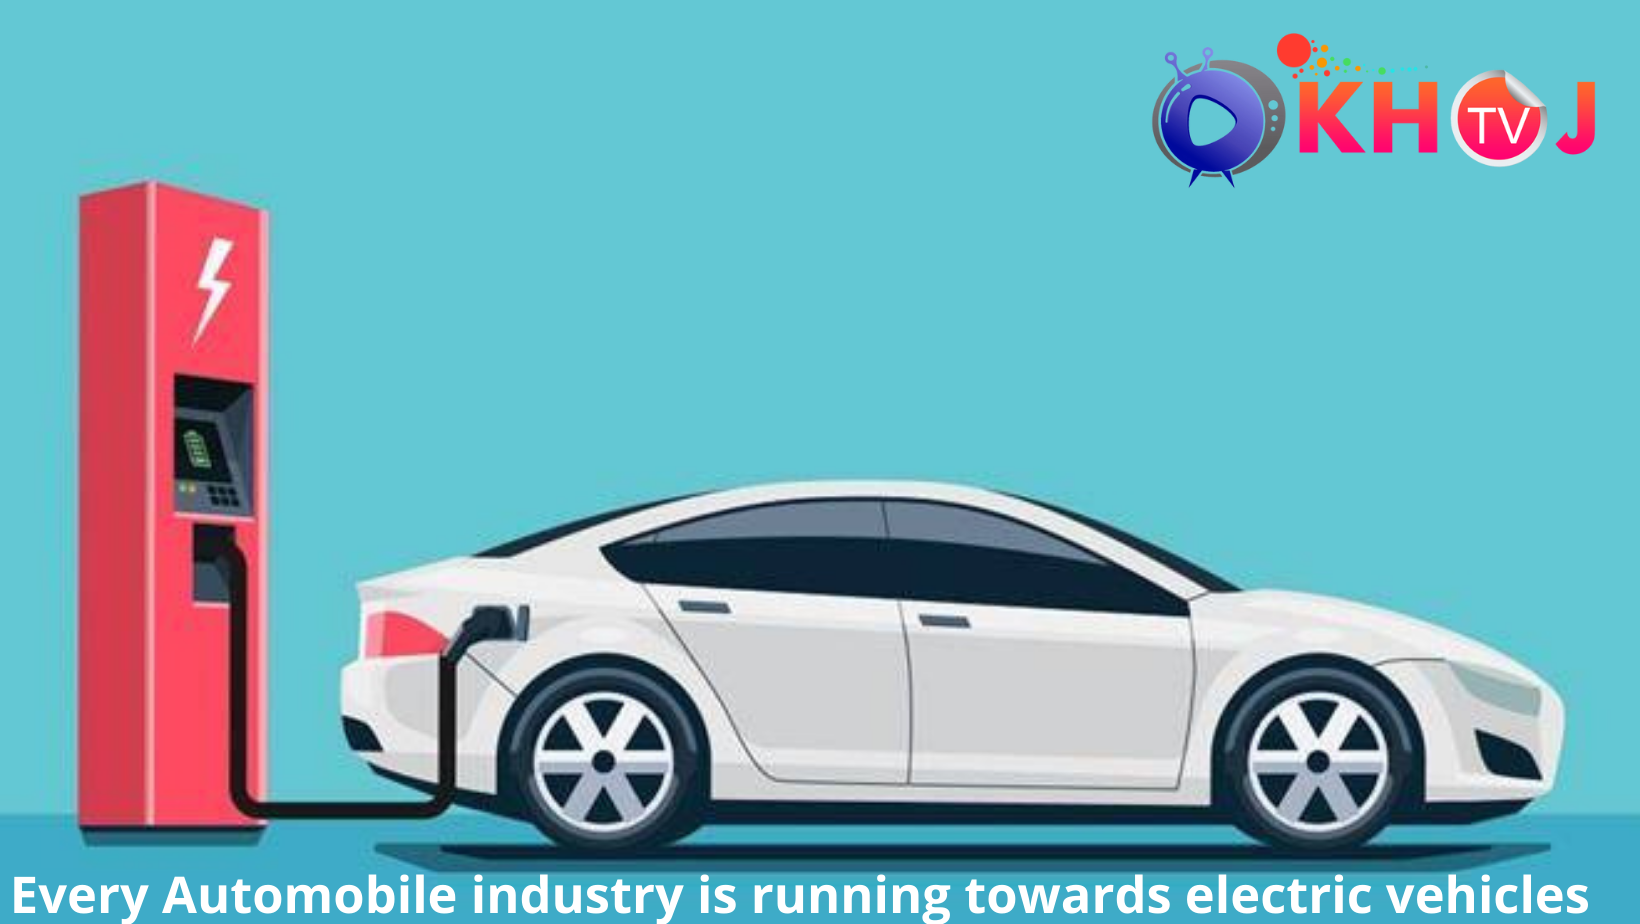 Every Automobile industry is running towards electric vehicles